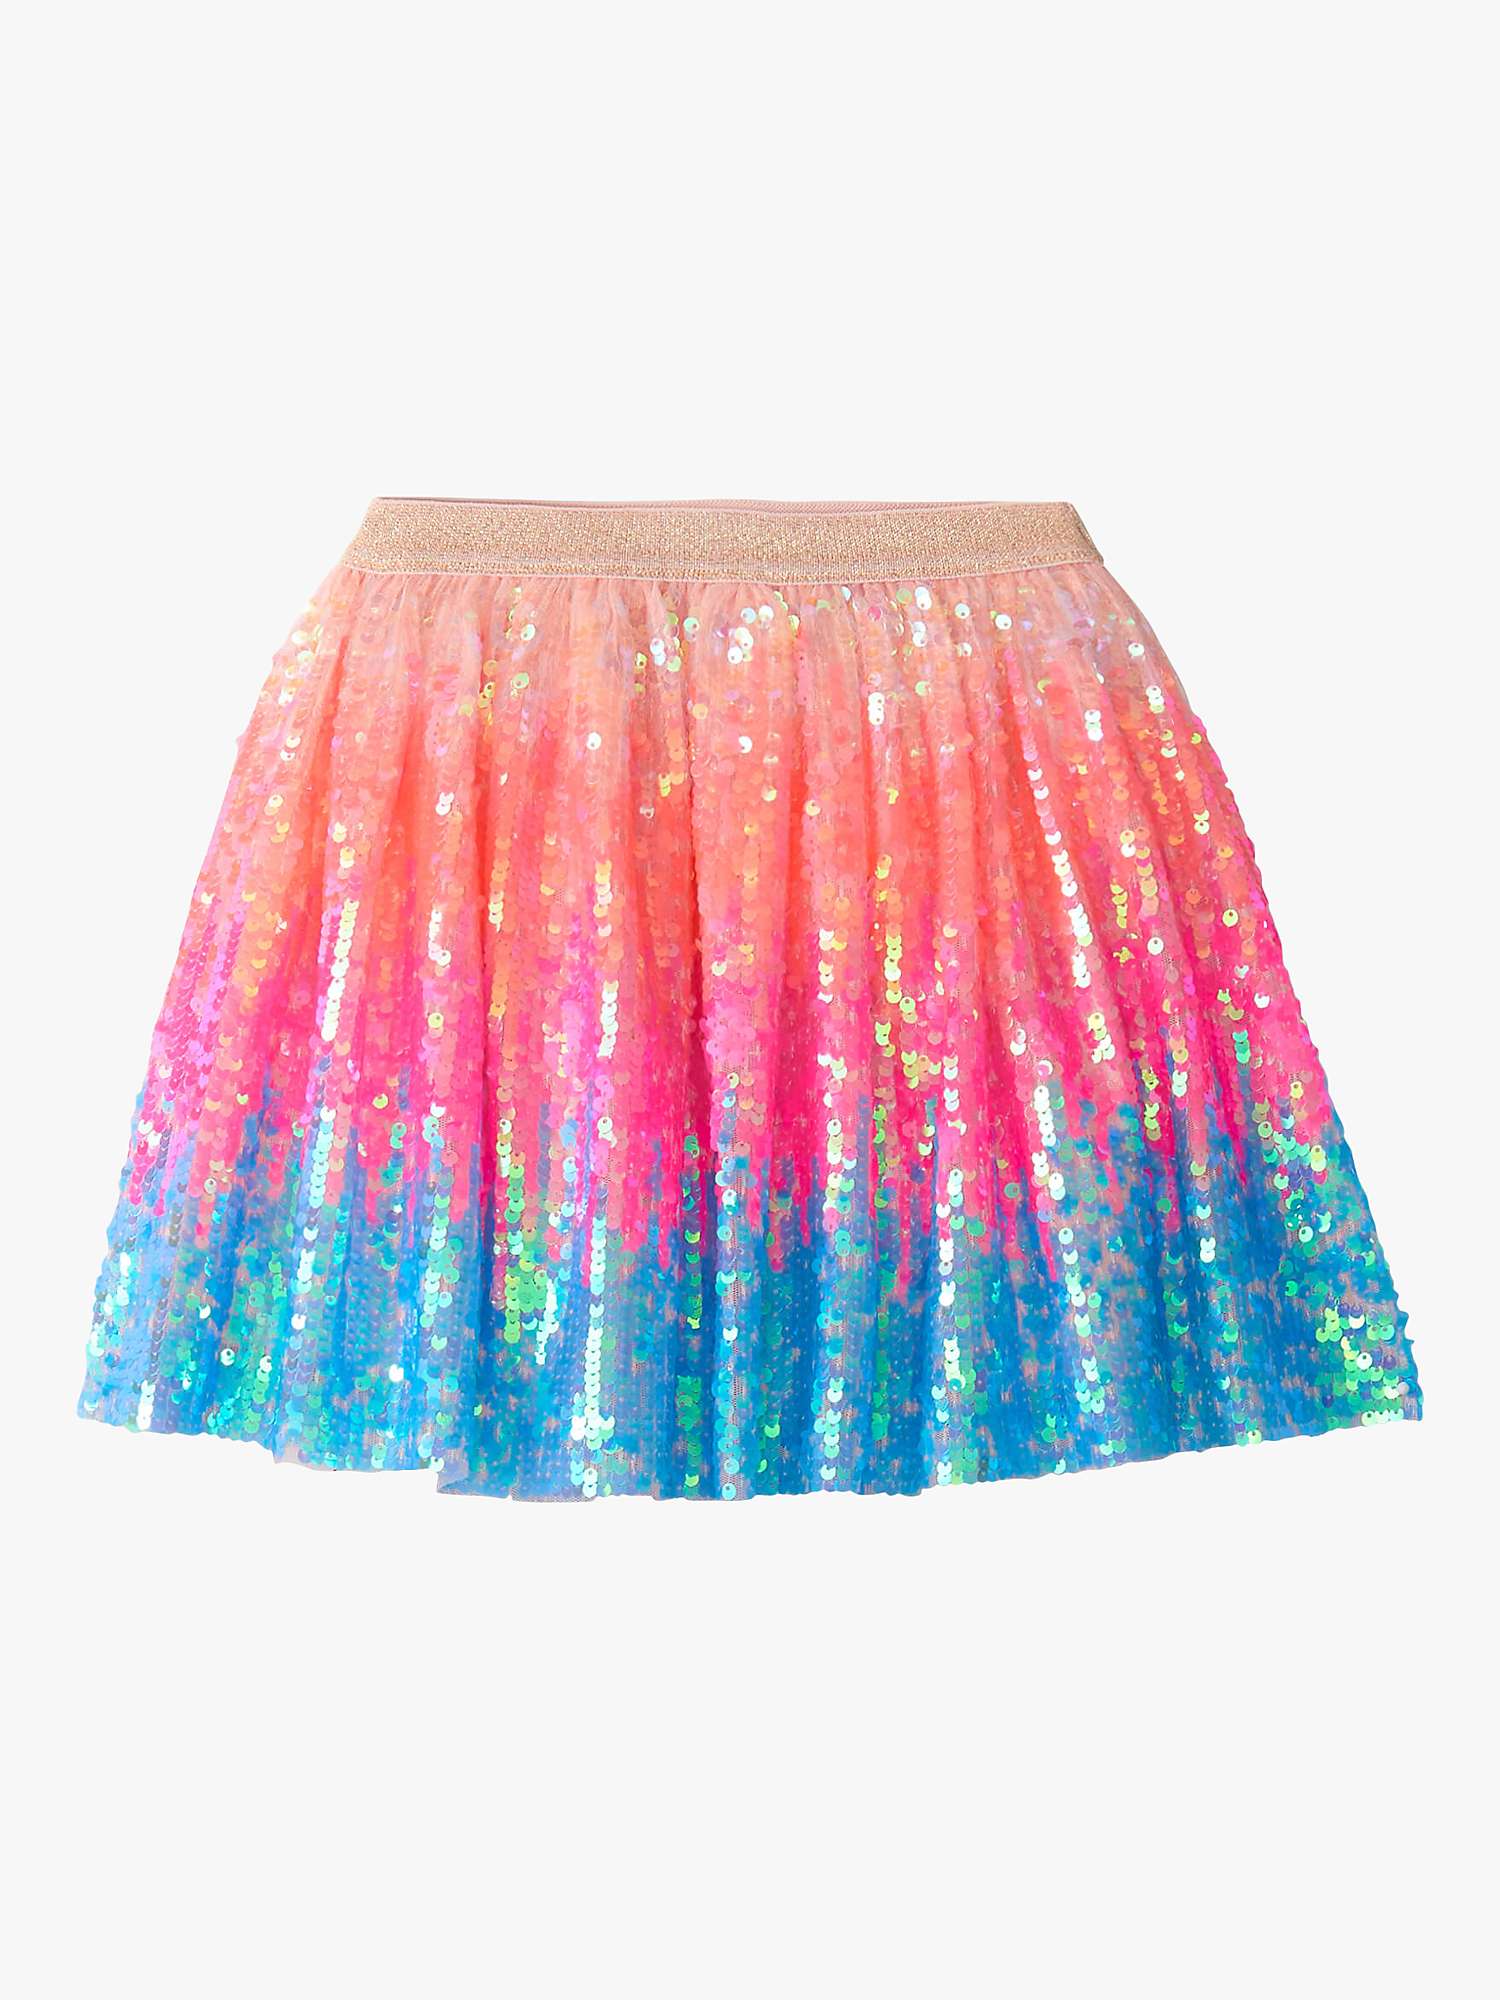 Buy Hatley Kids' Happy Sparkly Sequin Tulle Skirt, Pink/Multi Online at johnlewis.com